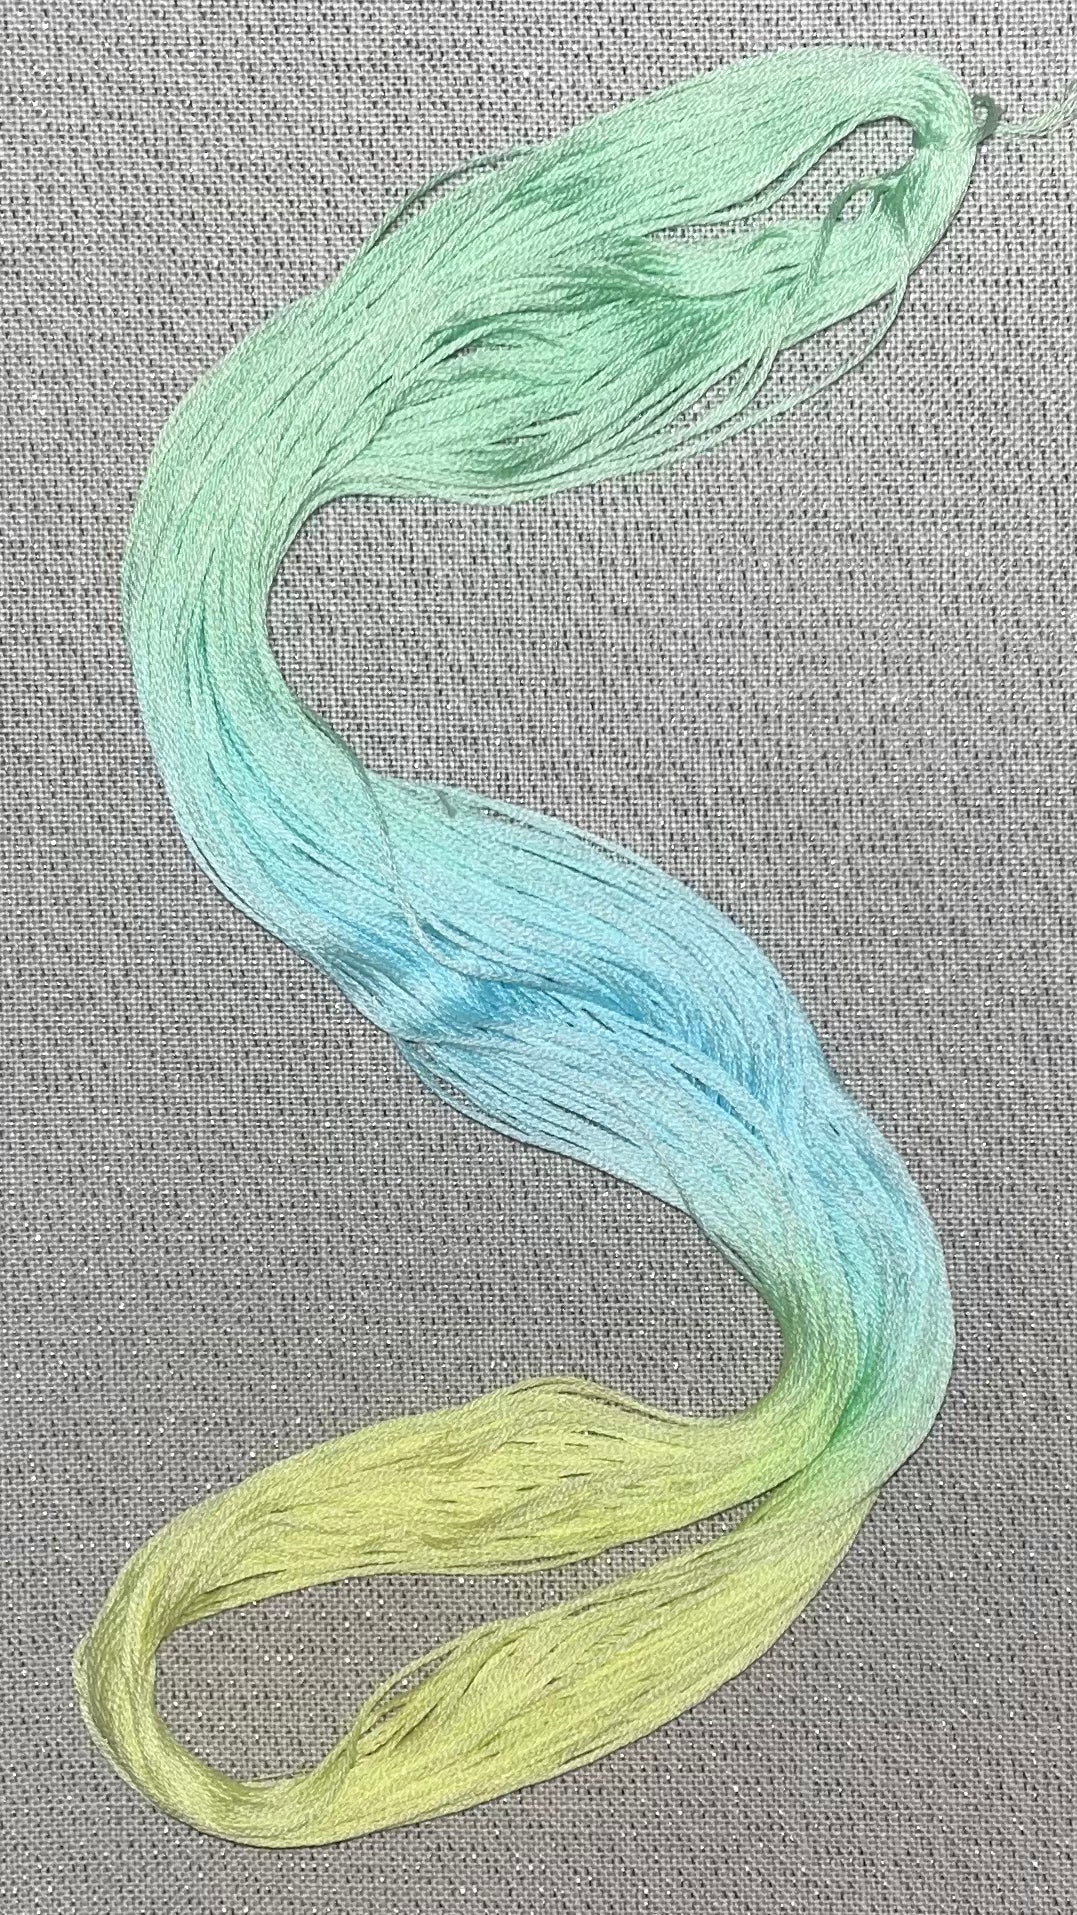 Cotton hand dyed floss - Hoppy Easter